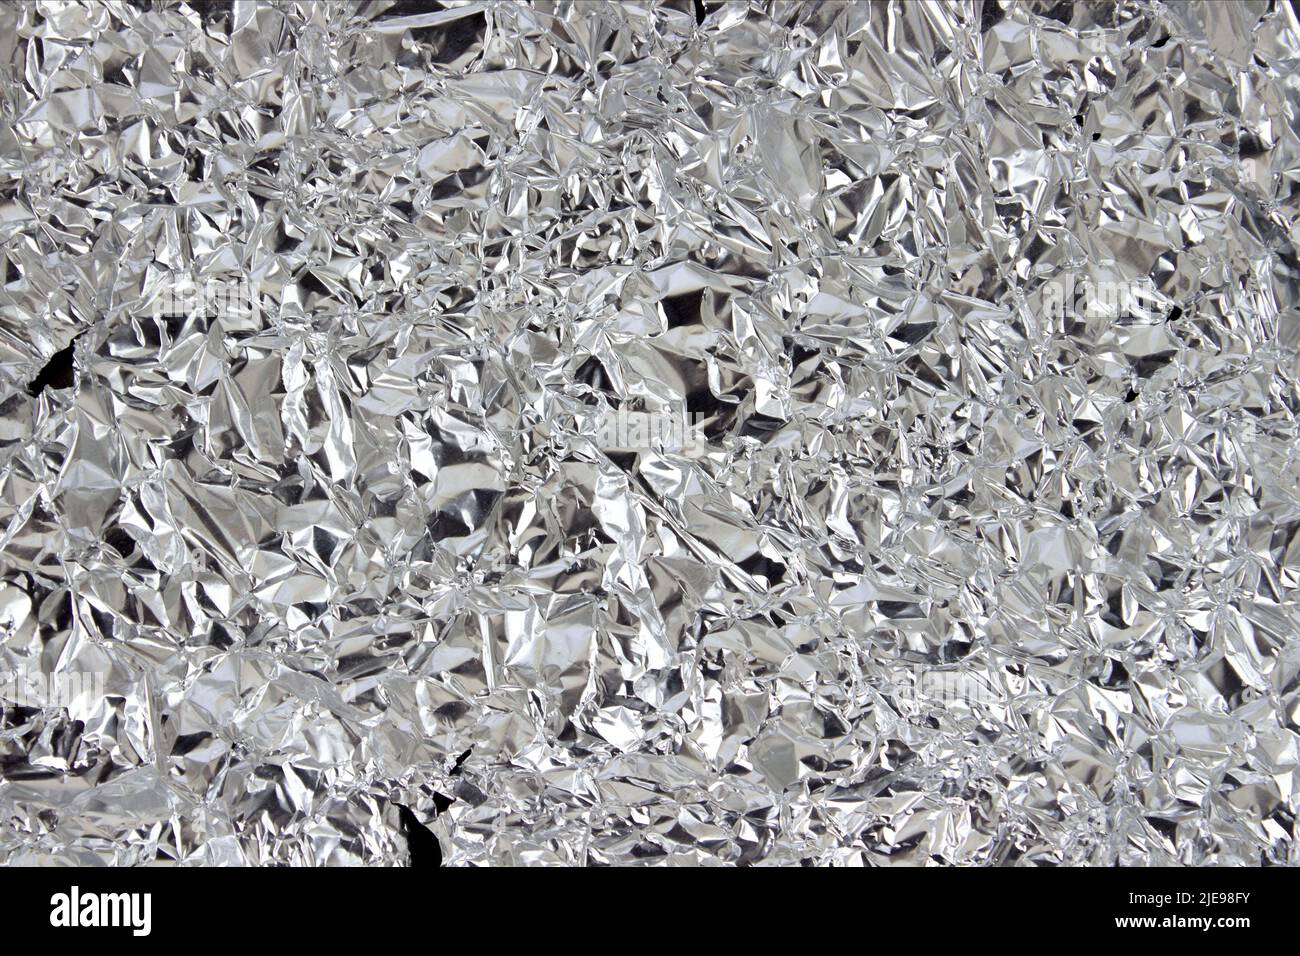 Crumpled silver foil seamless texture Royalty Free Vector